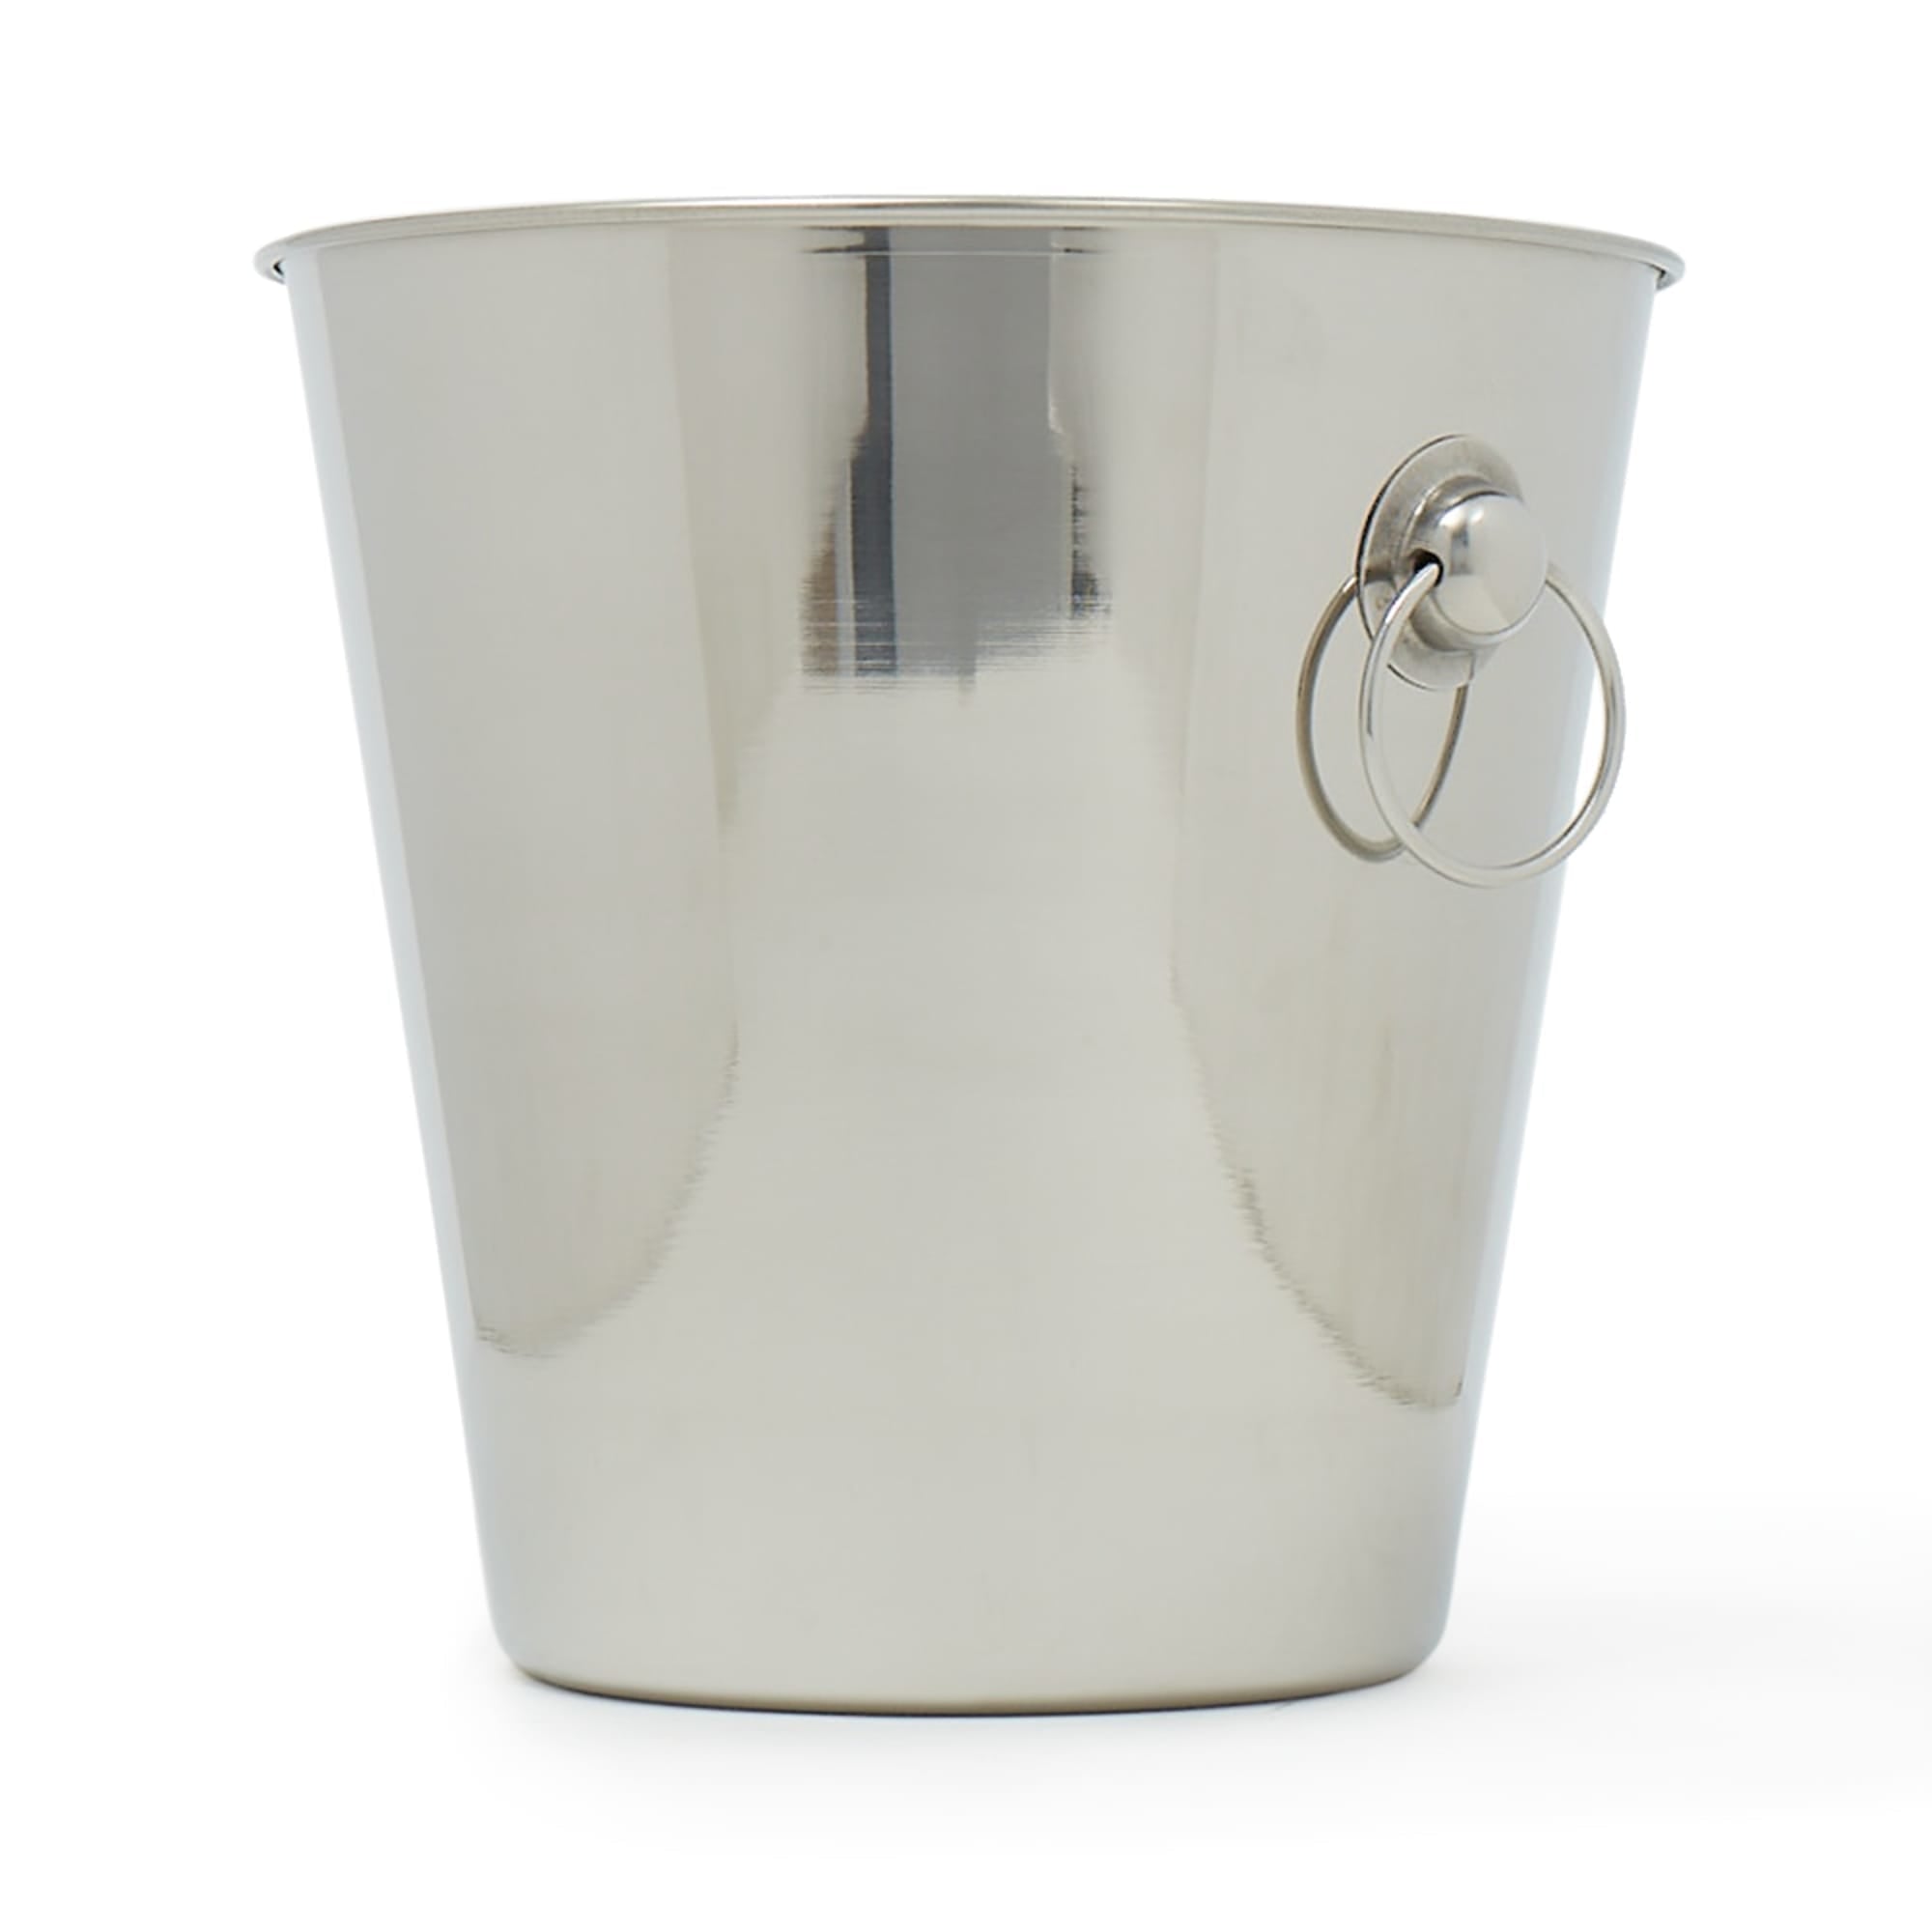 Home Basics Stainless Steel Ice Bucket $6.00 EACH, CASE PACK OF 12